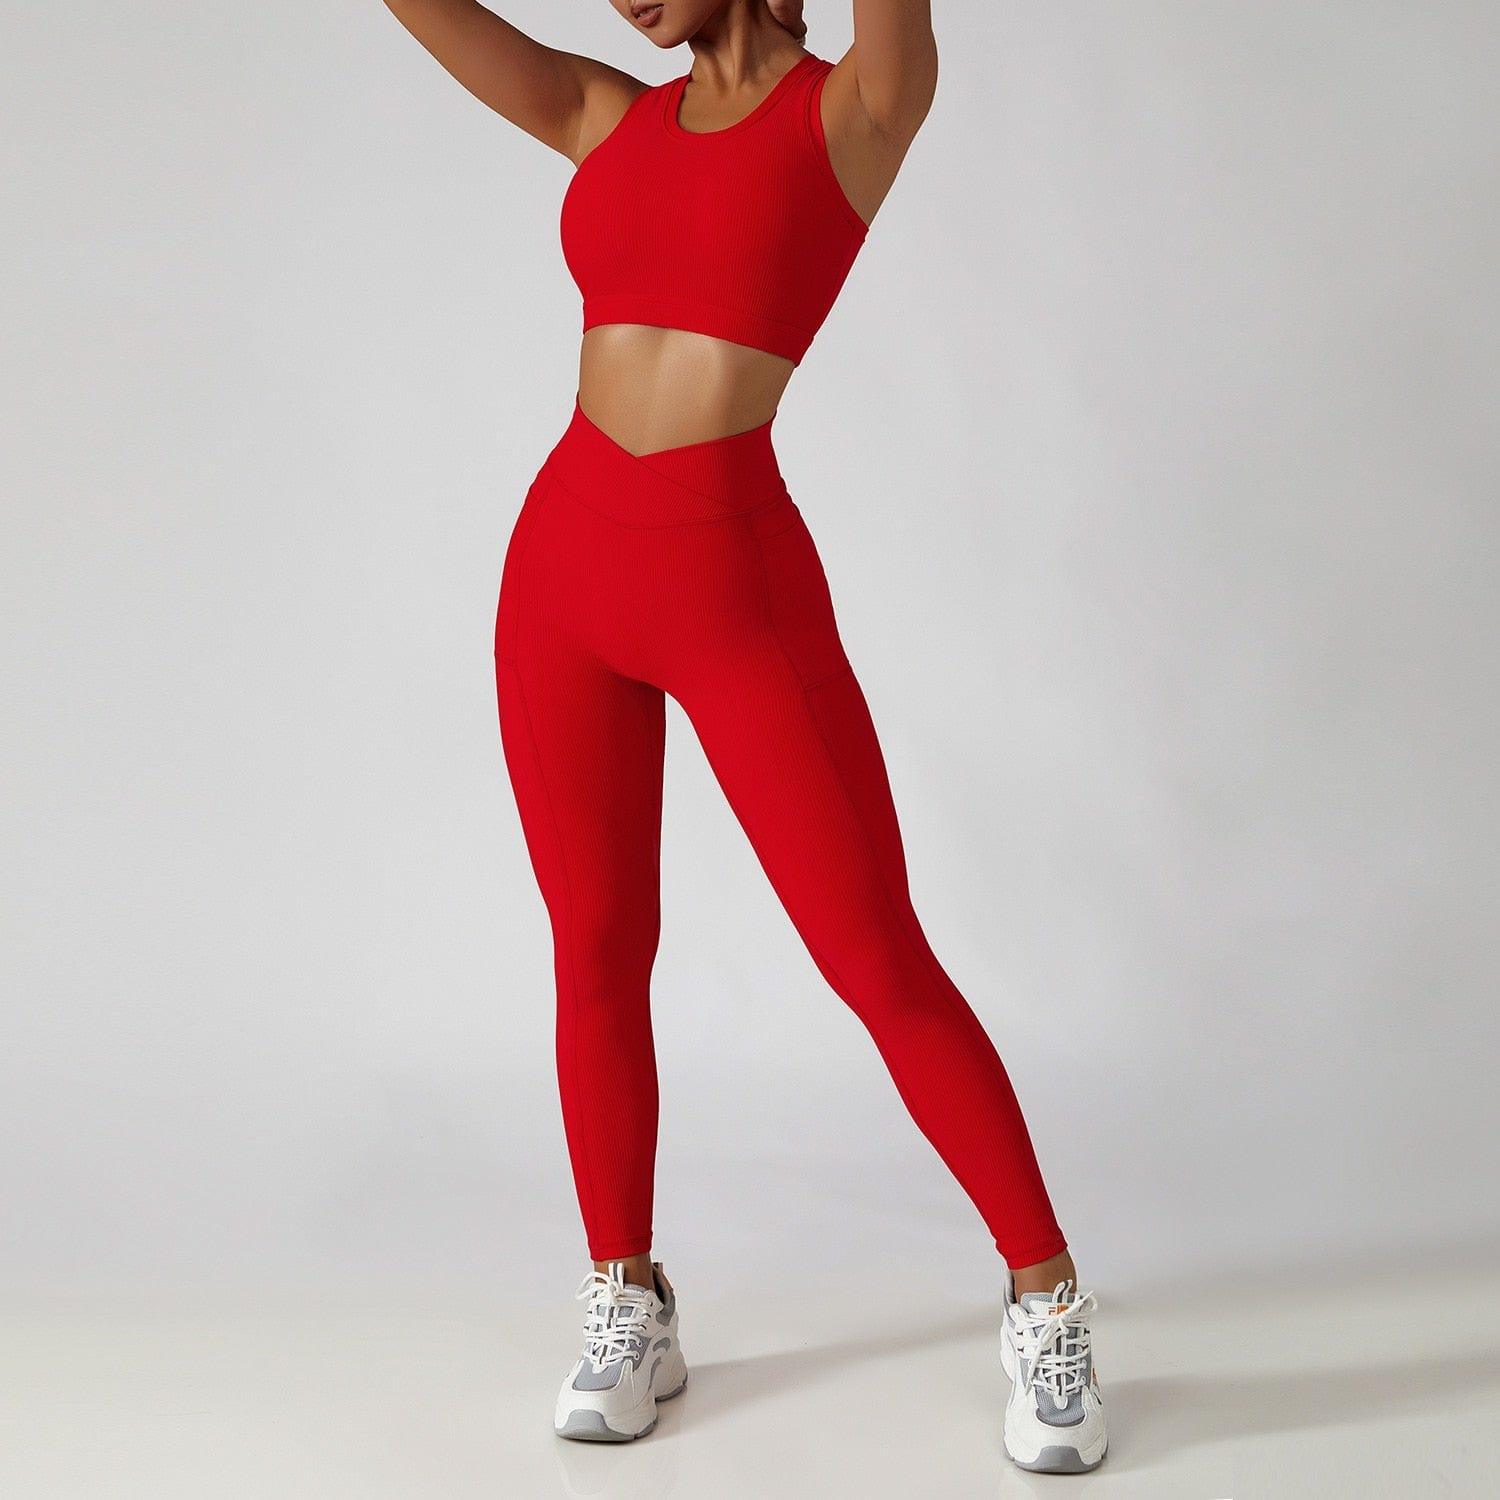 Shop 0 Red suit-4 / S / China 2 Pieces Seamless Women Tracksuit  Yoga Set Running Workout Sportswear Gym Clothes Fitness Bra High Waist Leggings Sports Suit Mademoiselle Home Decor